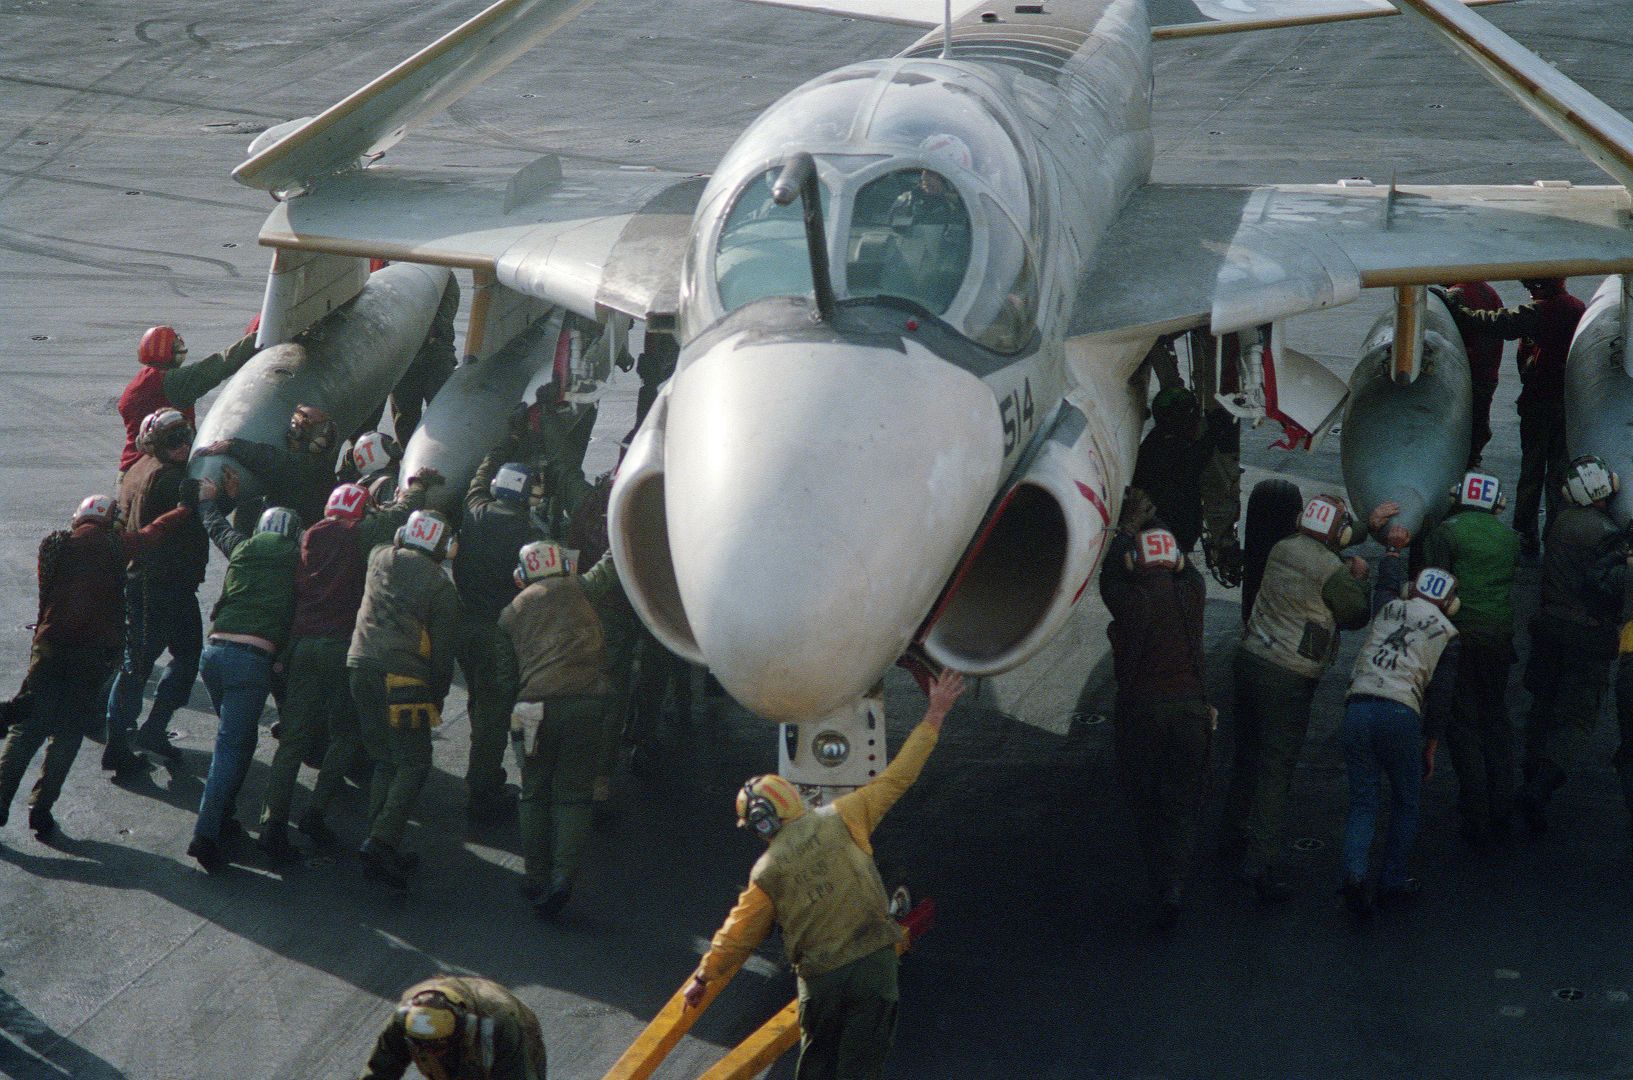 An A 6E Intruder Aircraft Is Maneuvered Into Place On The Flight Deck Of The Aircraft Carrier USS FORRESTAL In The North Atlantic Ocean During Exercise WEST WIND 88